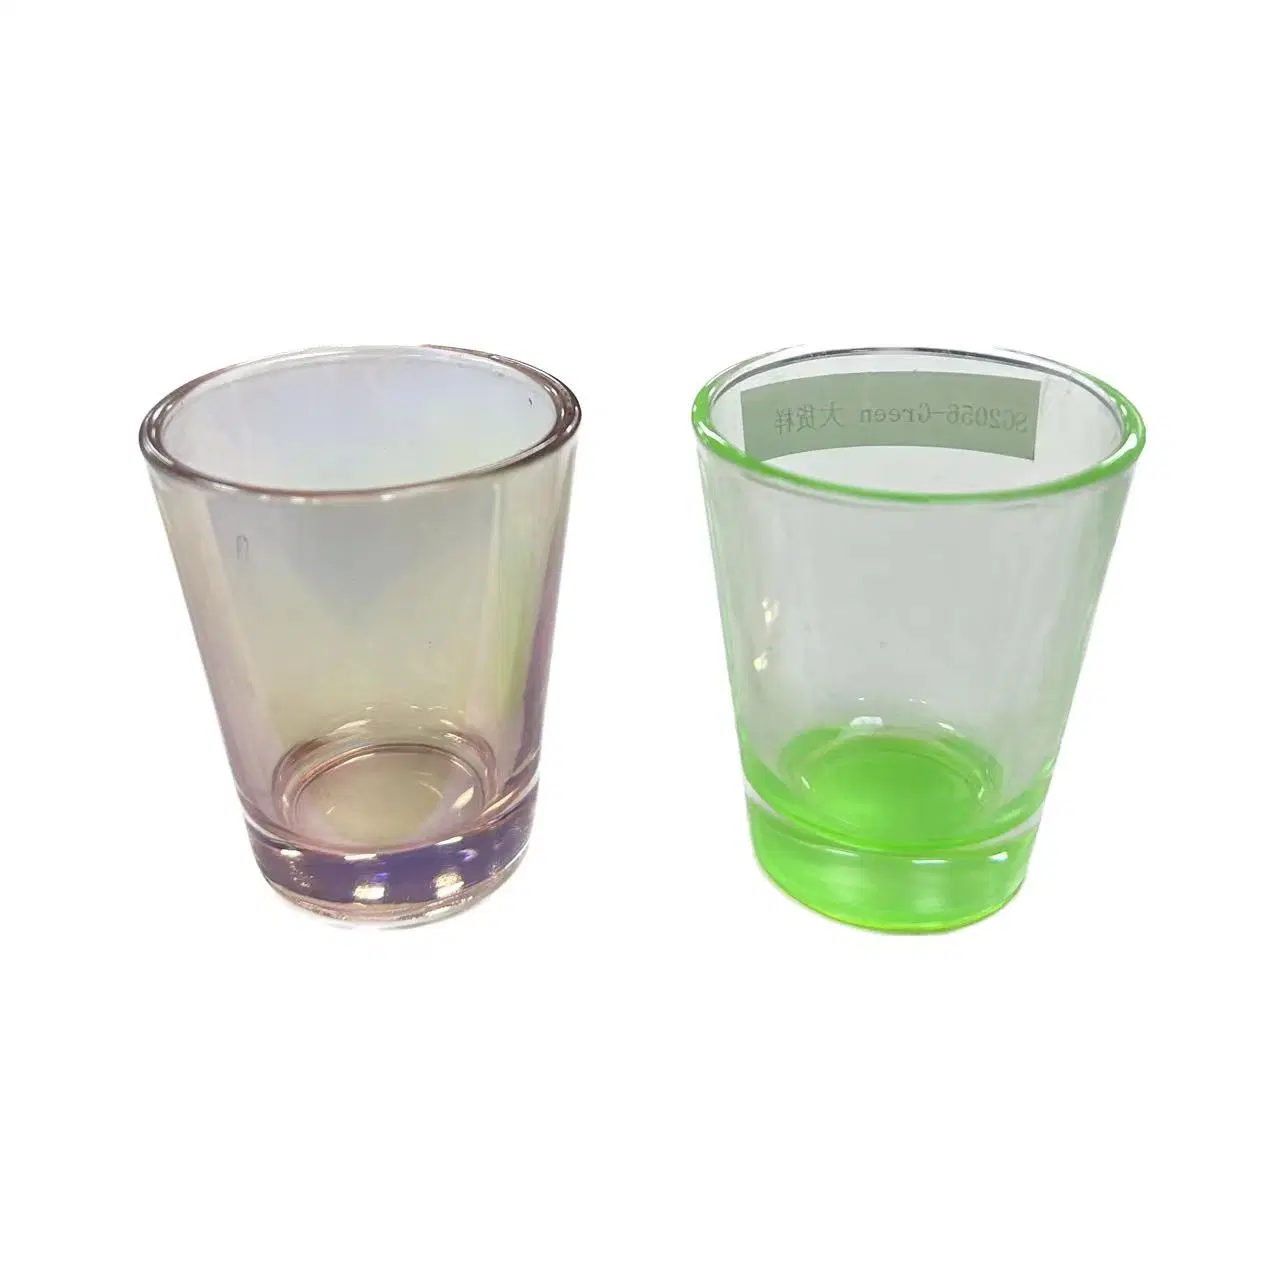 3 Oz Delicate Small Wine Cup Glass Colored Cup